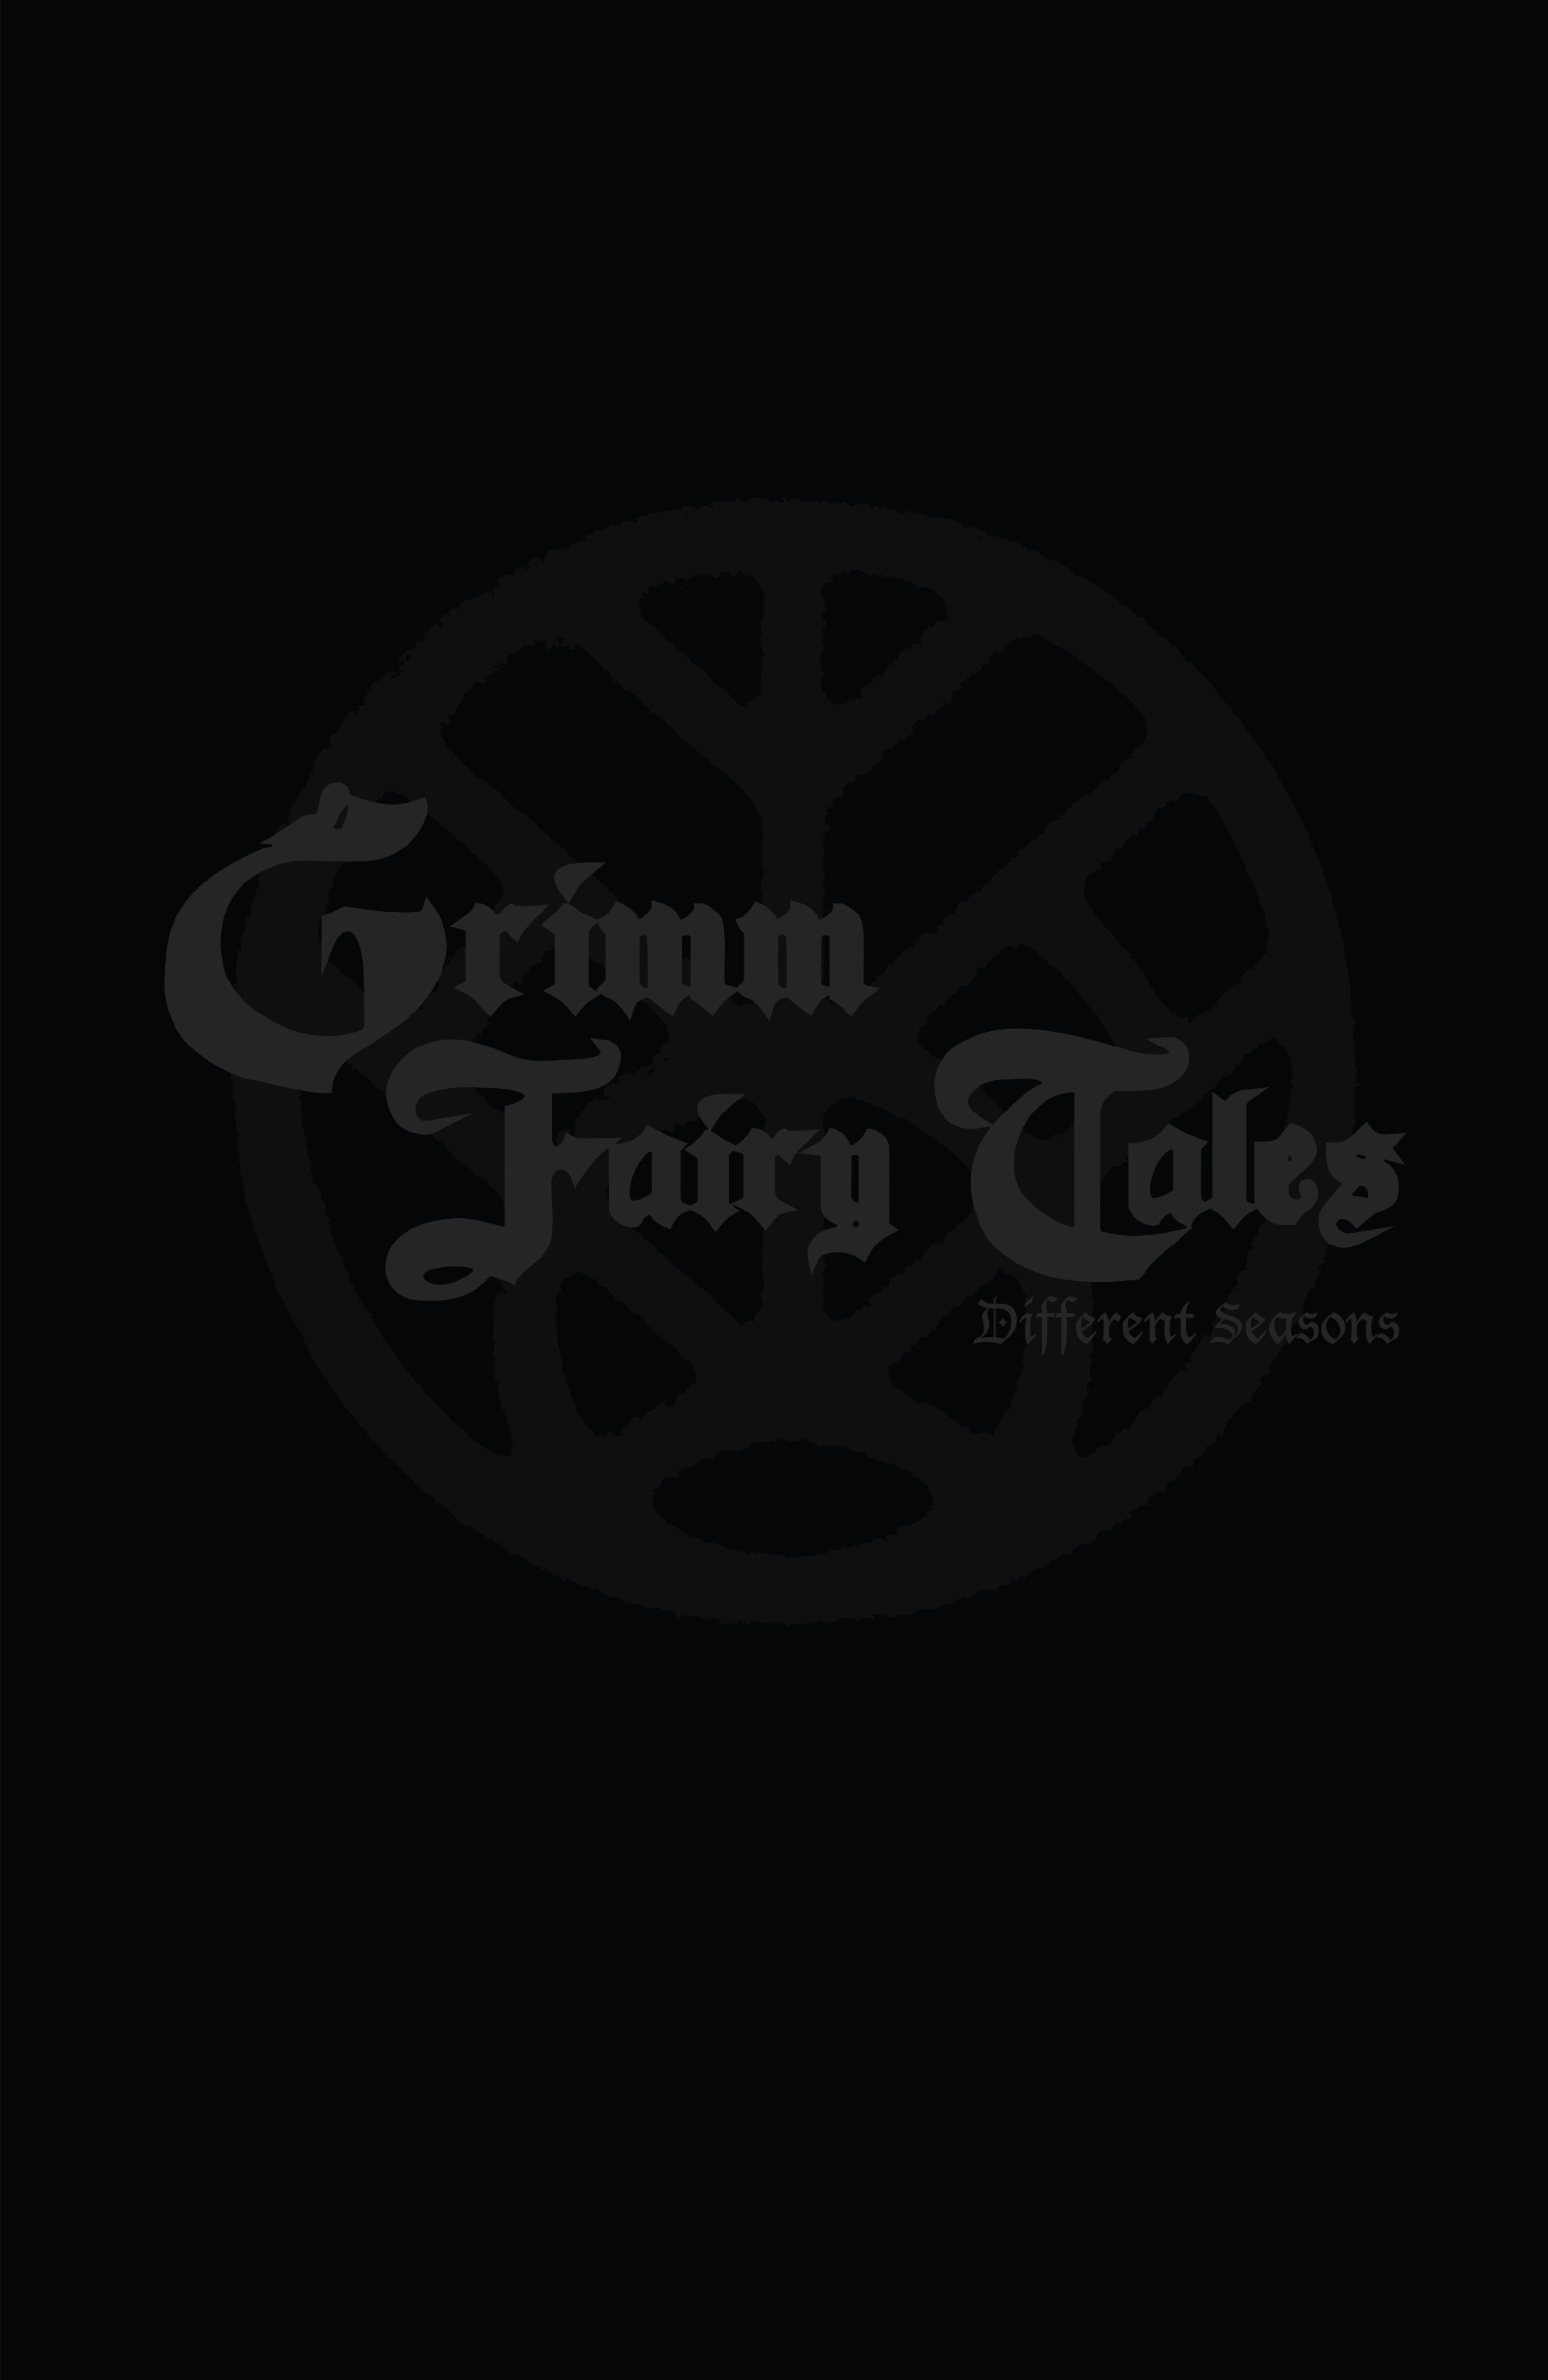 Read online Grimm Fairy Tales: Different Seasons comic -  Issue # TPB 2 - 49